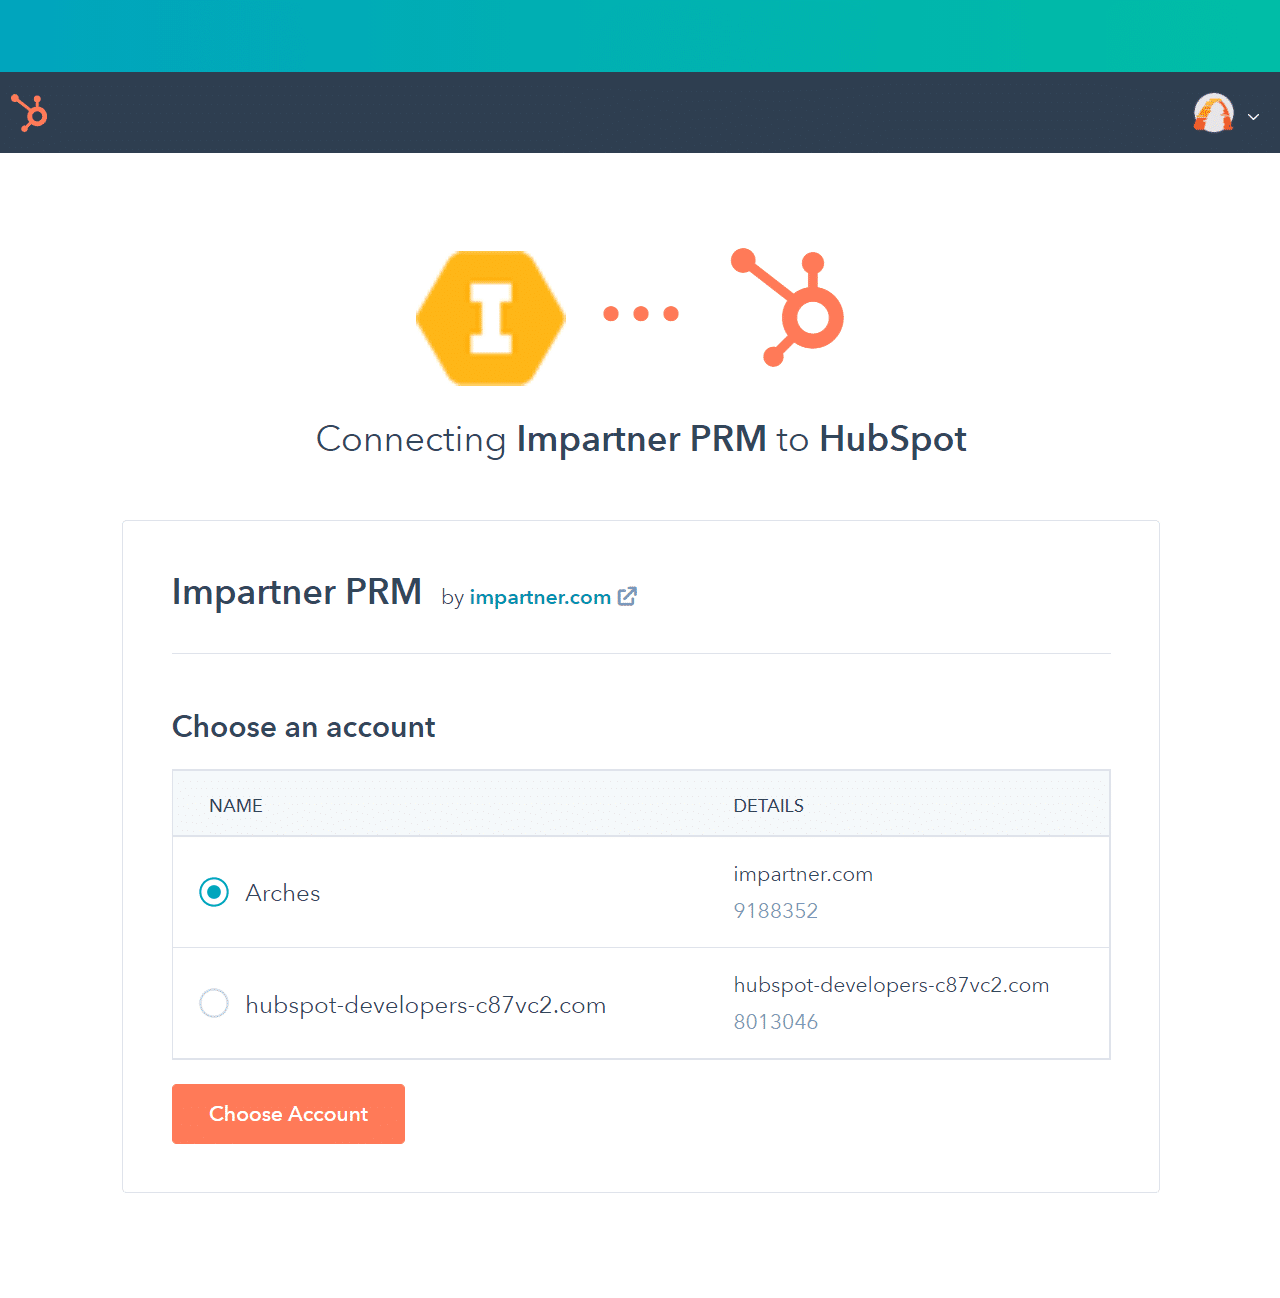 Connecting Impartner PRM to HubSpot